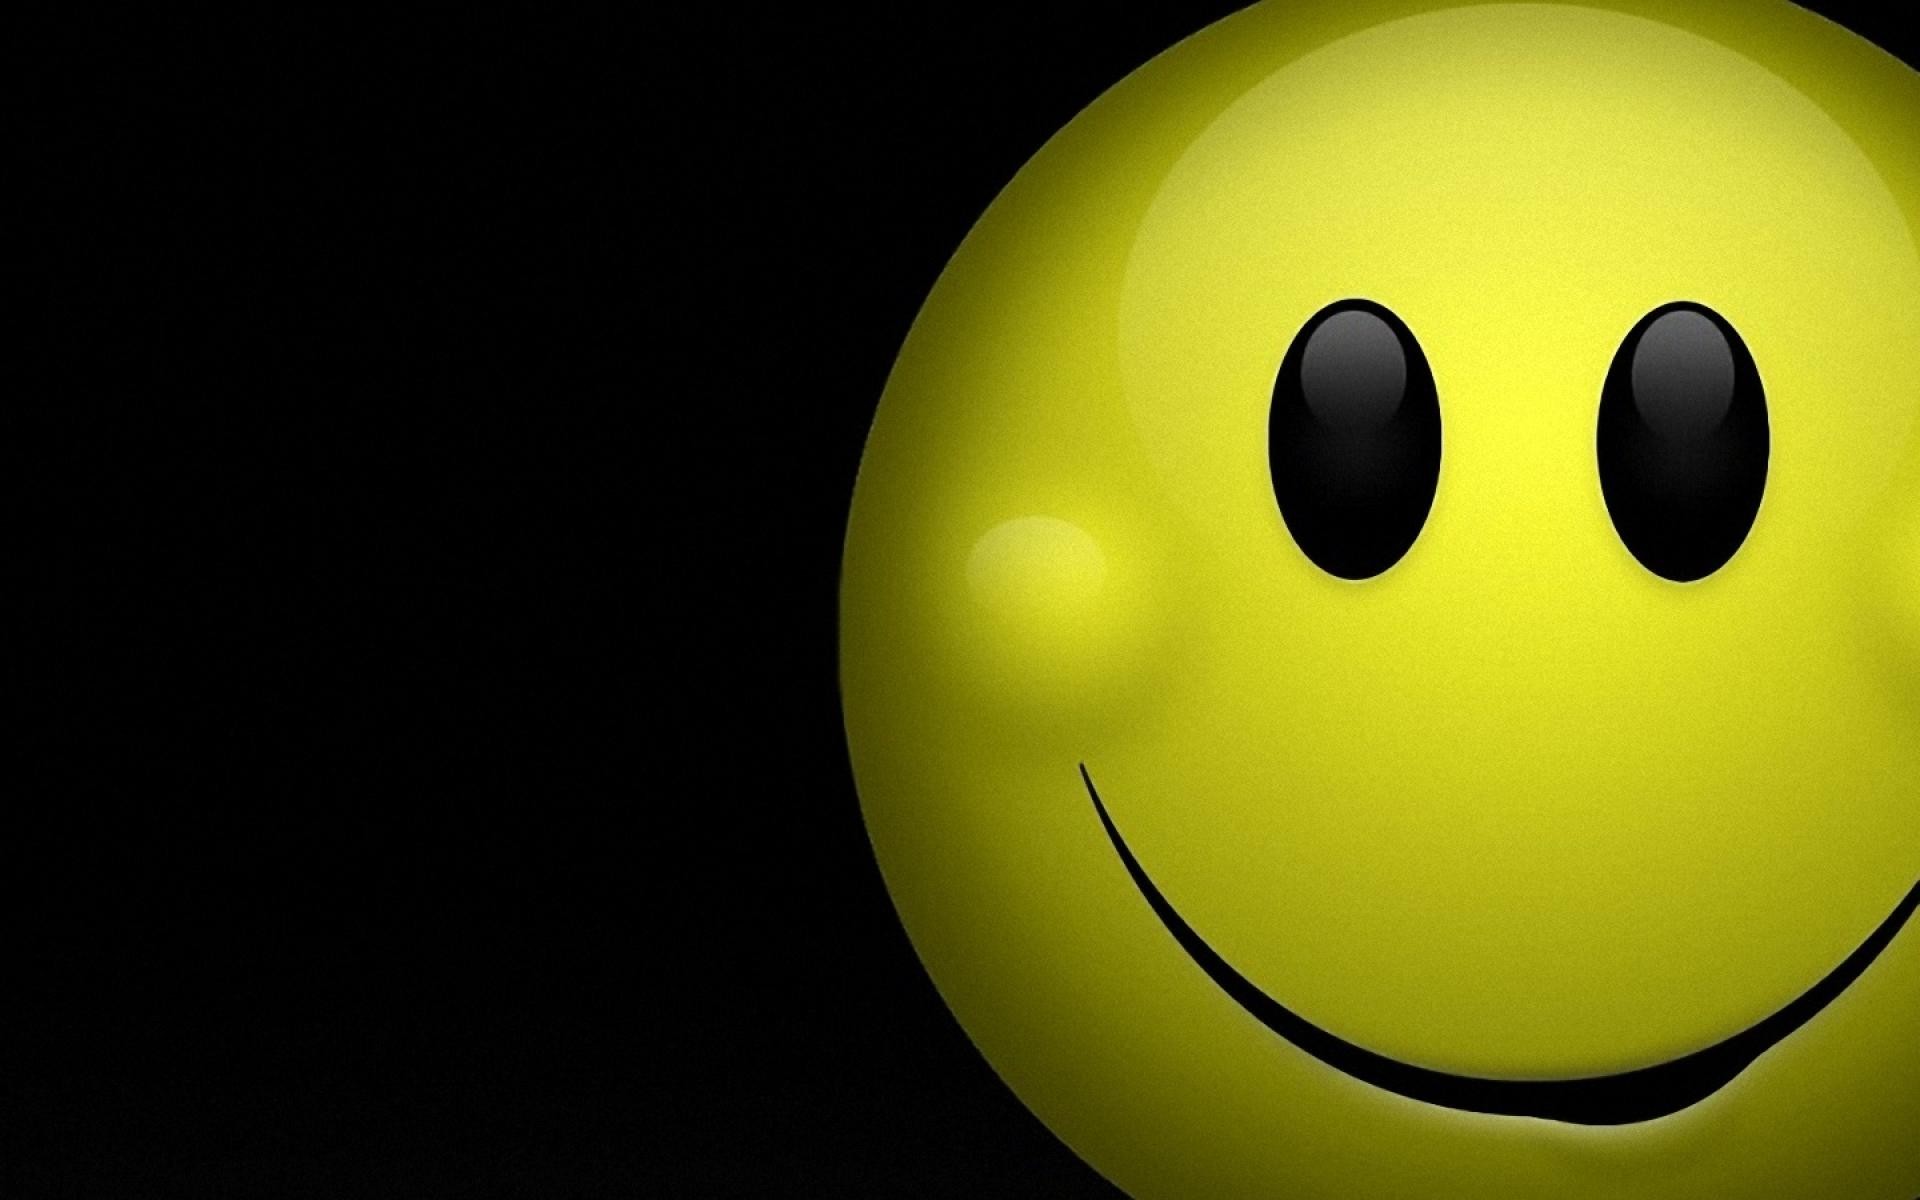 Top-Smiley-Face-iPhoneLovely-wallpaper-wp4208973 1920x1200.